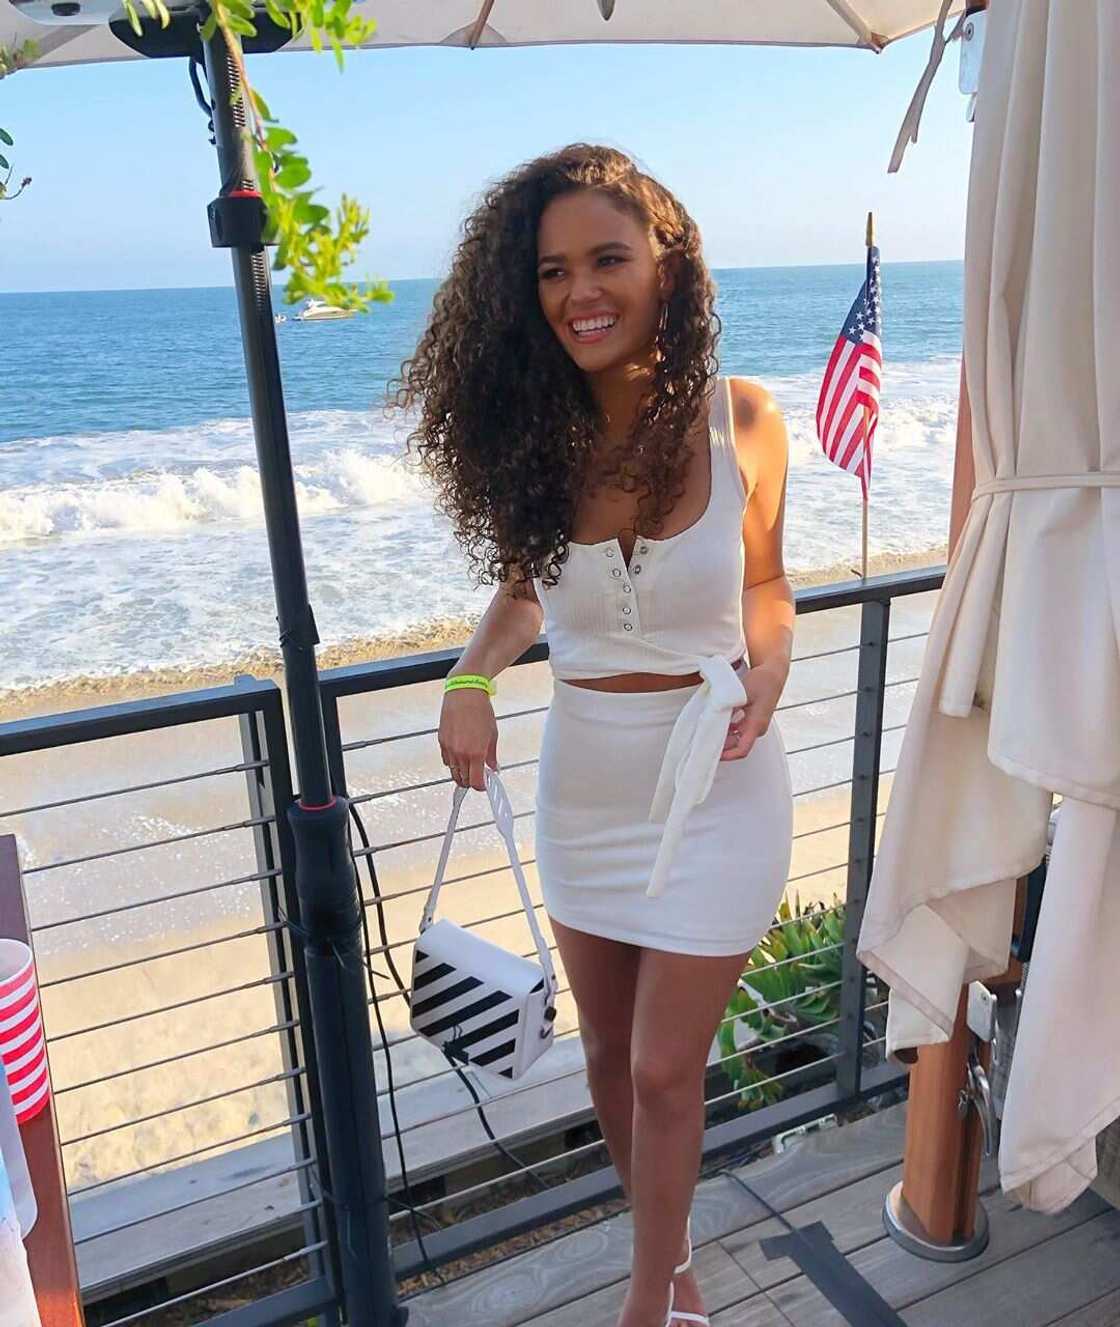 How old is Madison Pettis now?